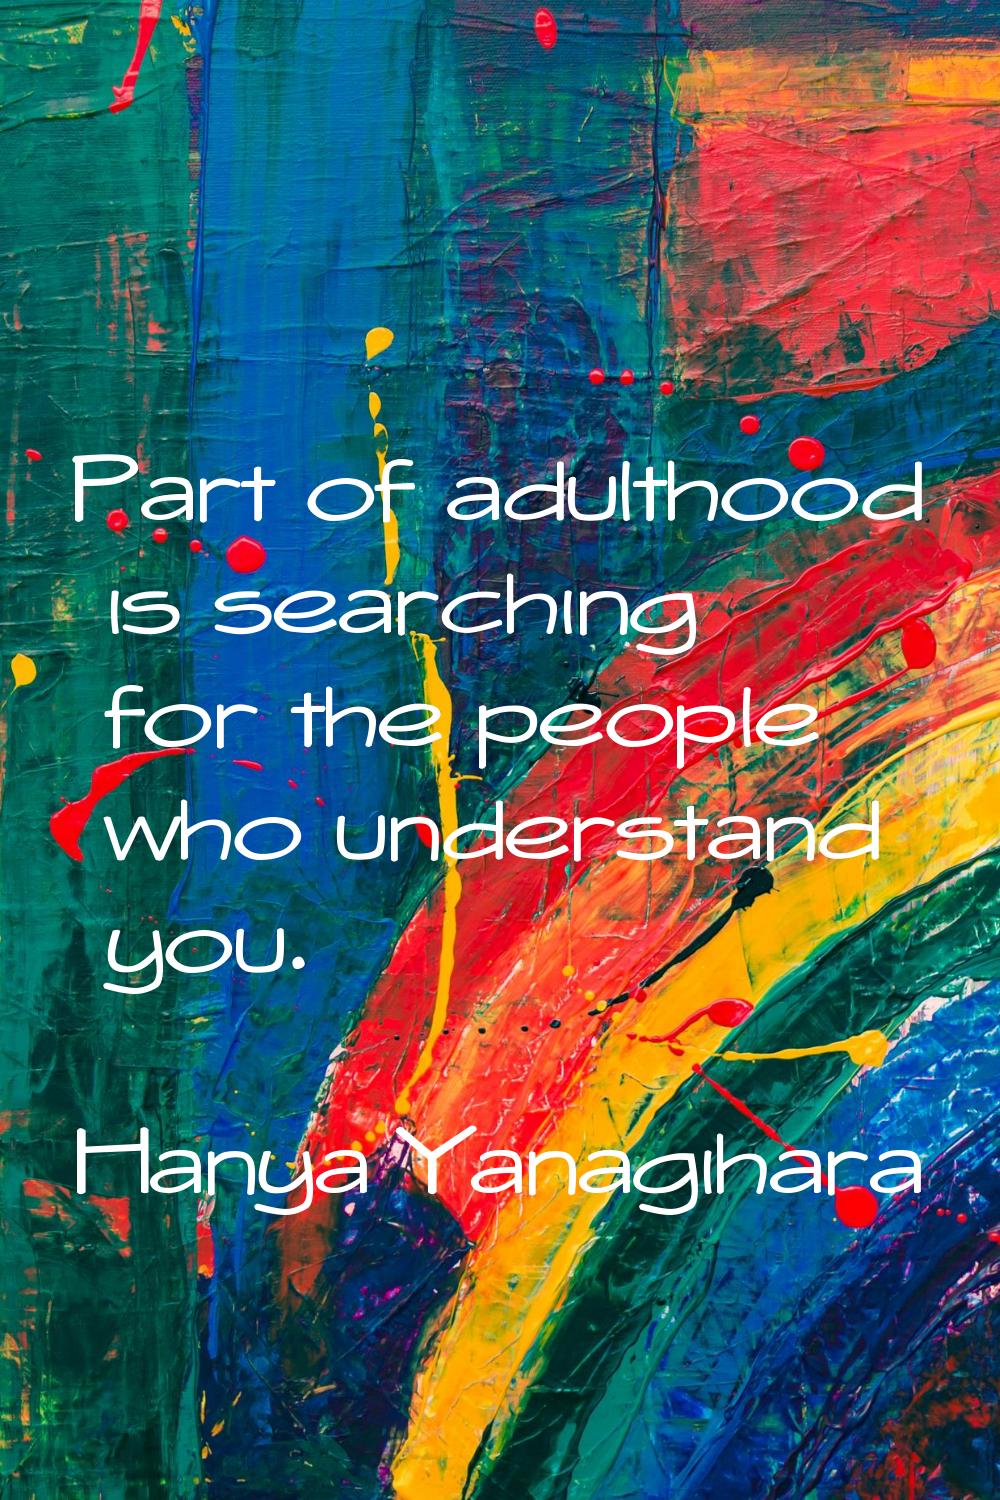 Part of adulthood is searching for the people who understand you.